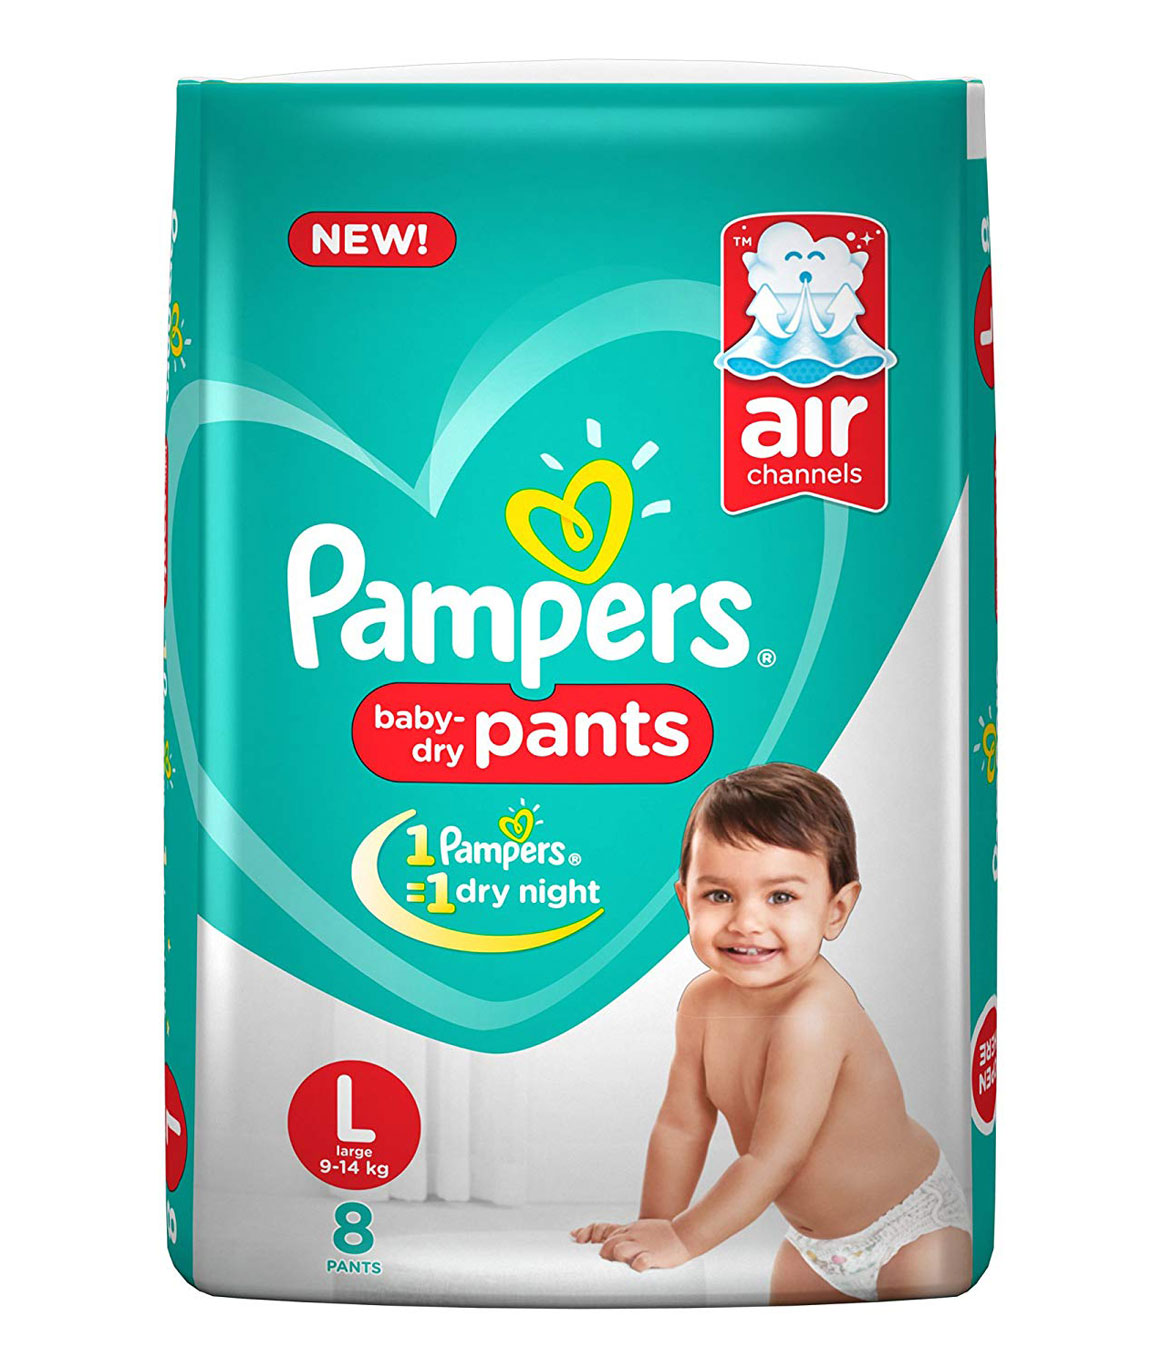 910 Pant Diapers Stock Photos Pictures  RoyaltyFree Images  iStock